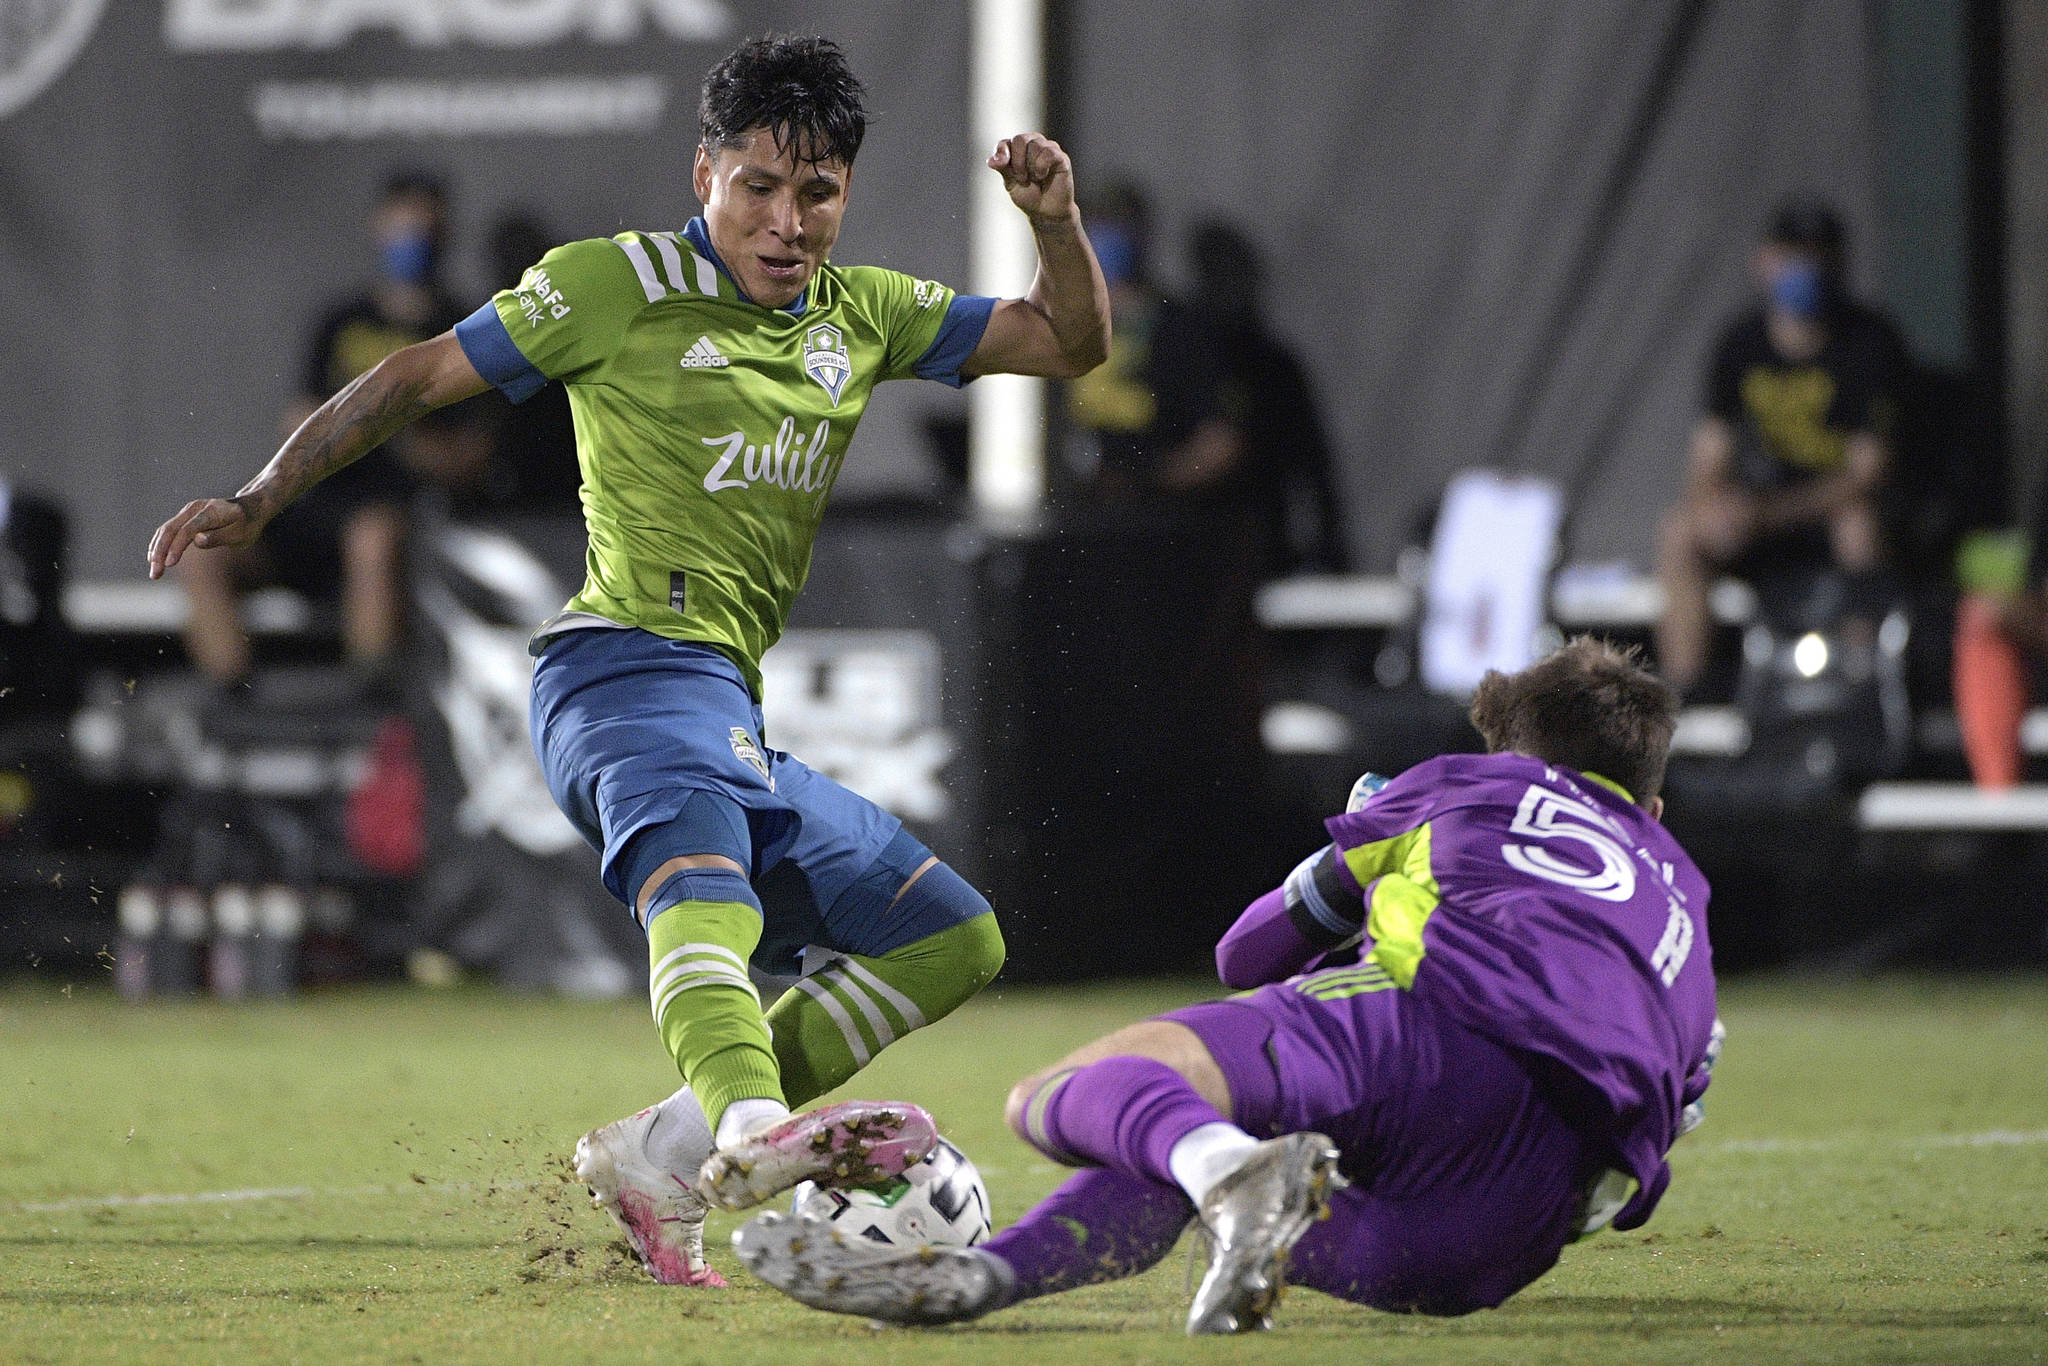 Seattle Sounders forward Raul Ruidiaz (9) has his shot blocked by Vancouver Whitecaps goalkeeper Thomas Hasal (51) during the second half of an MLS soccer match, Sunday, July 19, 2020, in Kissimmee, Fla. (AP Photo/Phelan M. Ebenhack)